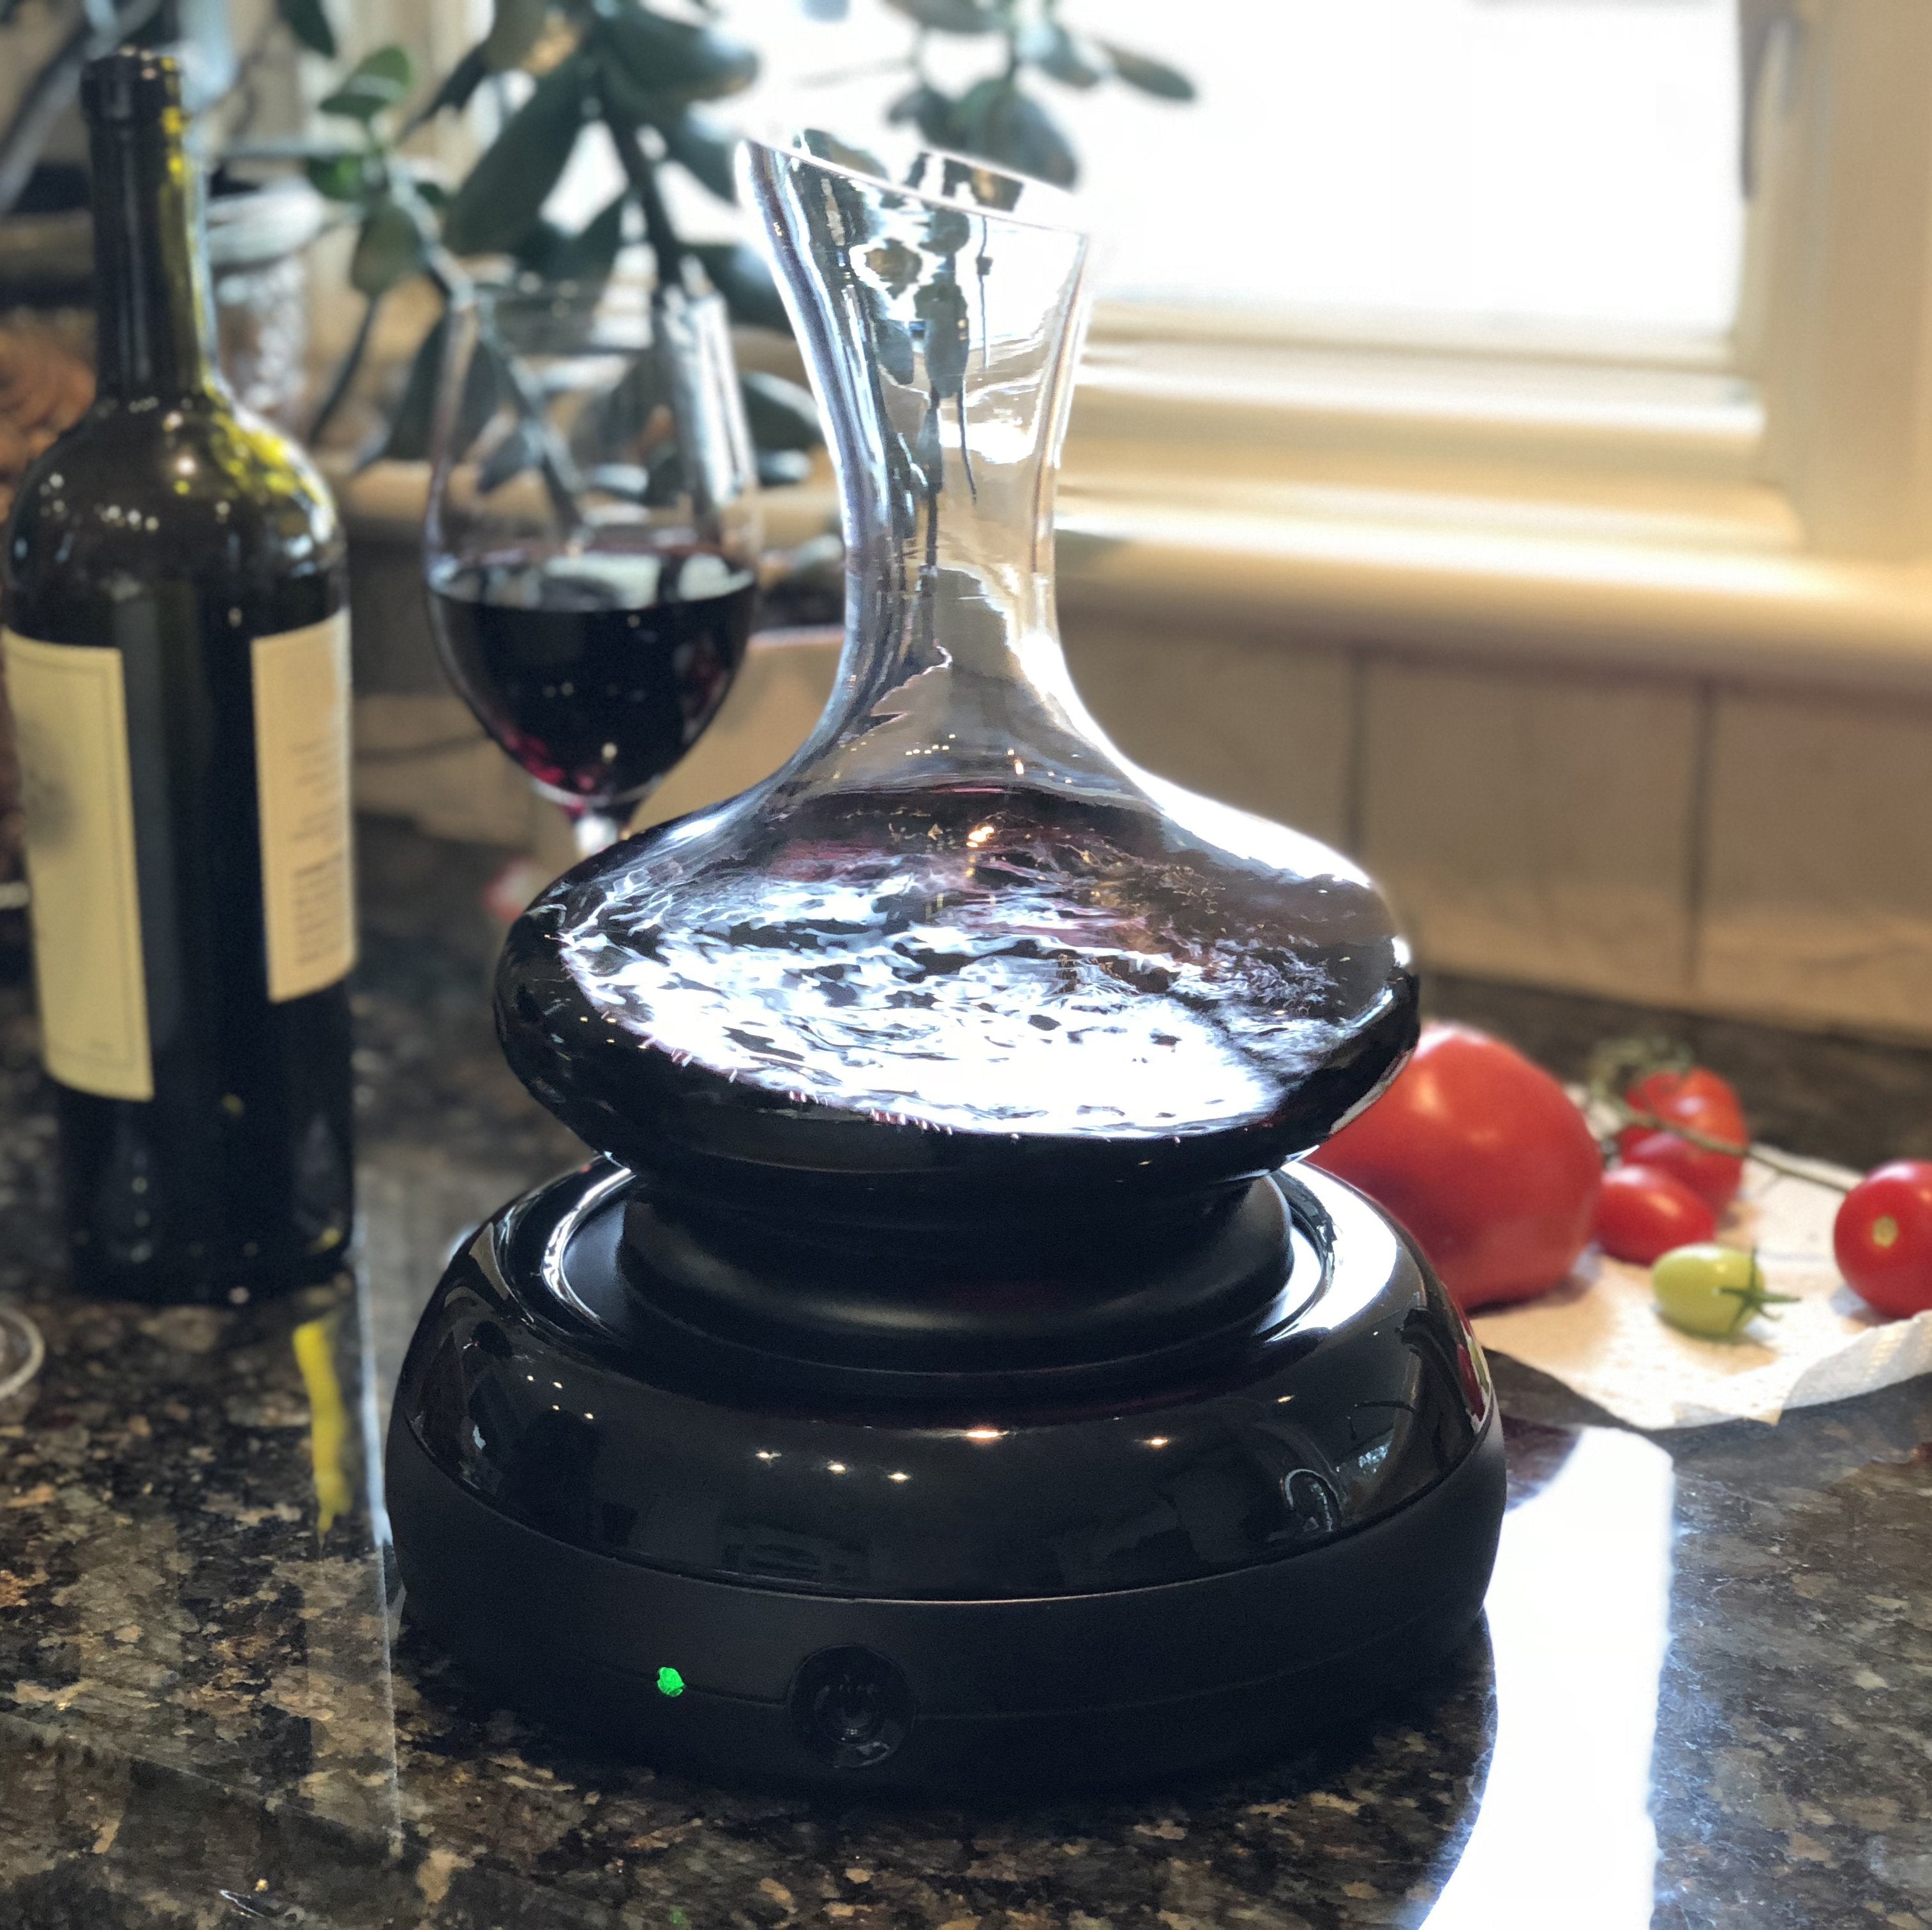 Aerisi Wine Aerator and glass decanter filled with red wine sitting on dark granite kitchen counter by white window sill. Bottle of wine, wine glass woth wine and chelrry tomatoes sitting o the counter in the background near the wine decanter.